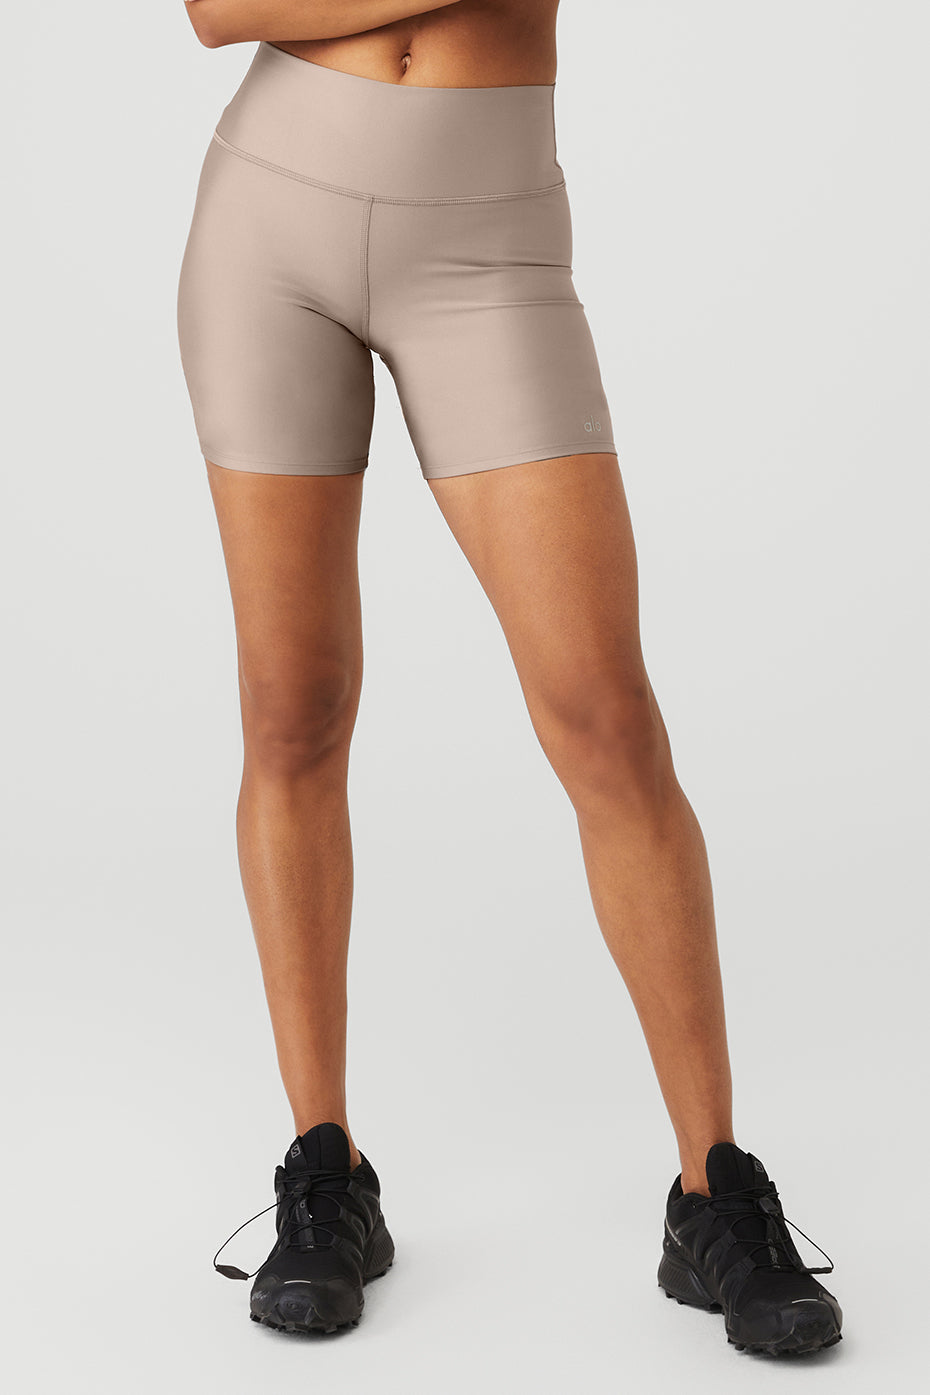 5 Airlift Energy Short - Taupe - Taupe / L